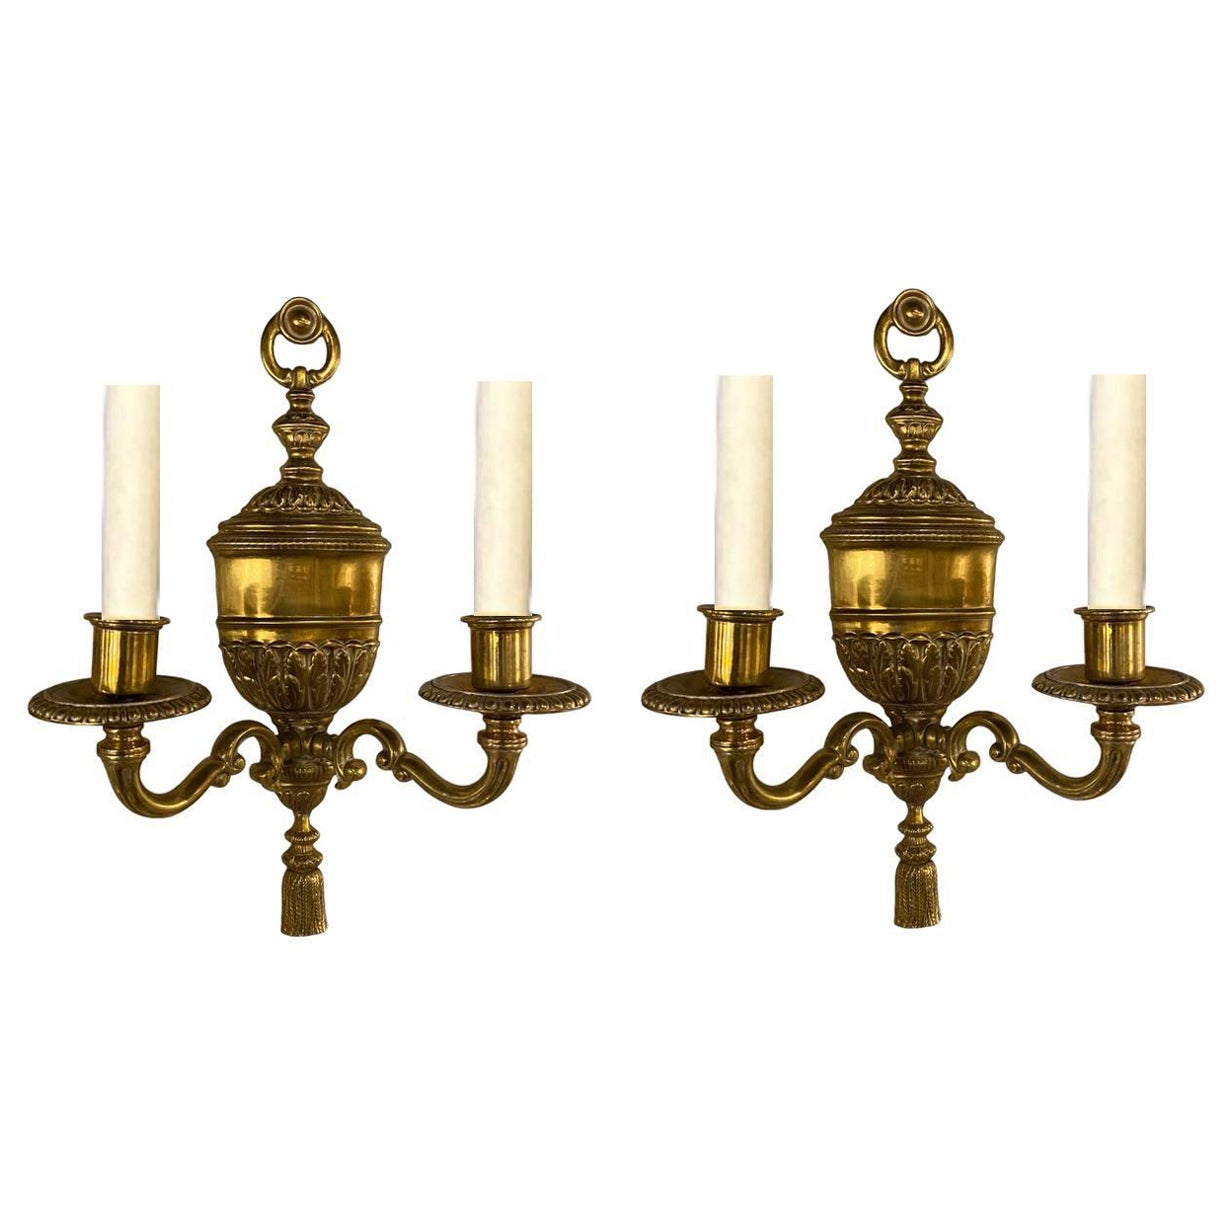 1920's Gilt Bronze Sconces with Acanthus Leaves